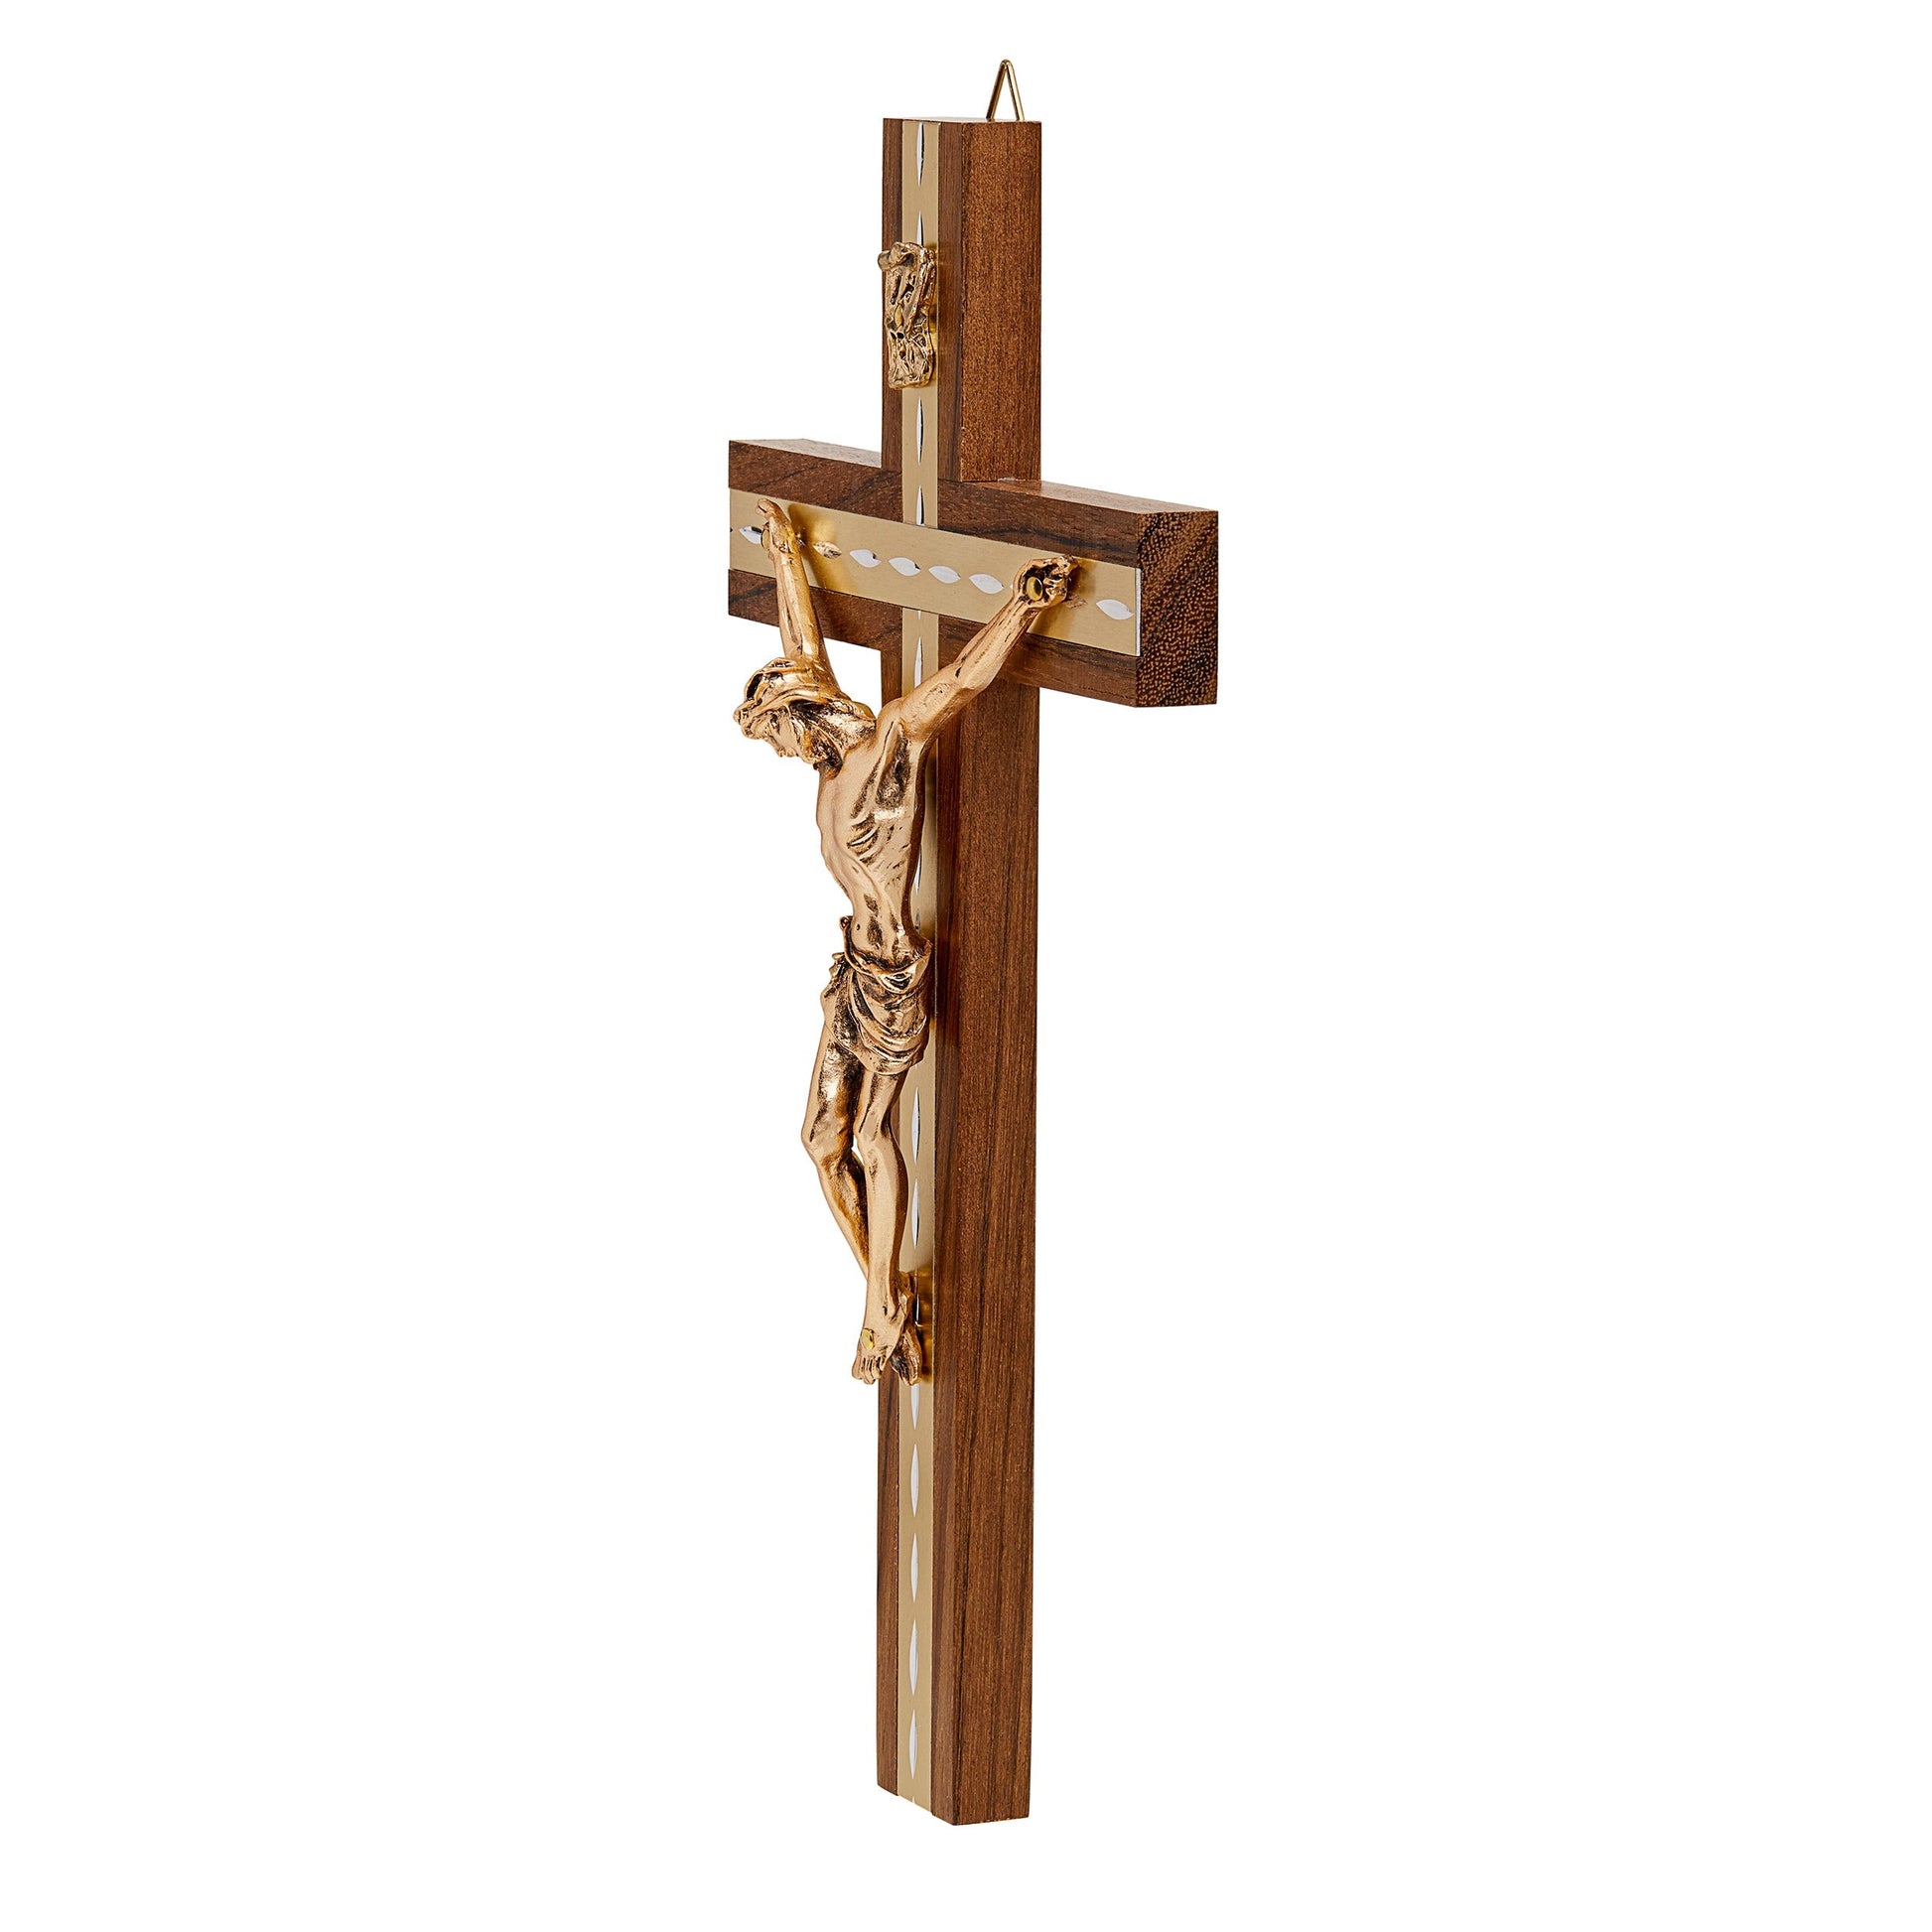 MONDO CATTOLICO Walnut Crucifix With Inlays and Gold Details